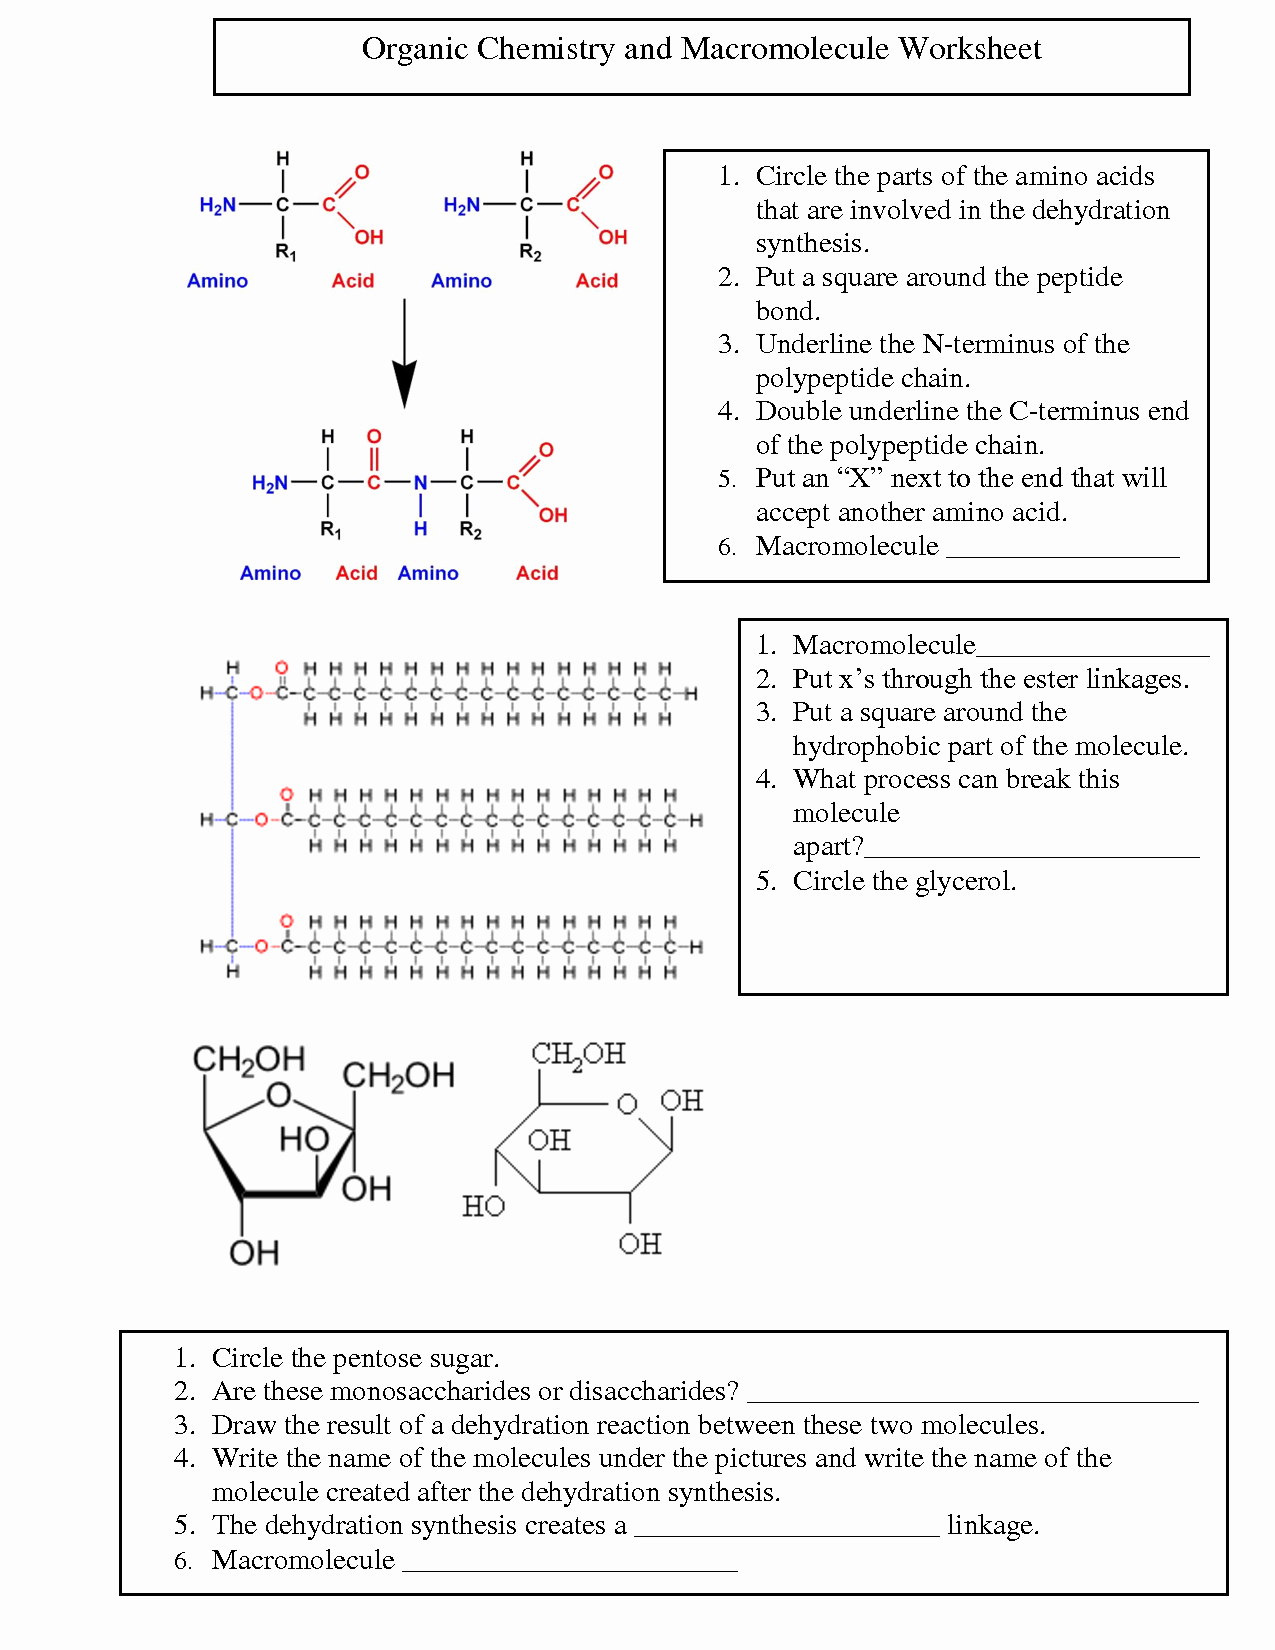 Organic Compounds Worksheet Answers Inspirational organic Chemistry Worksheet Biological Science Picture